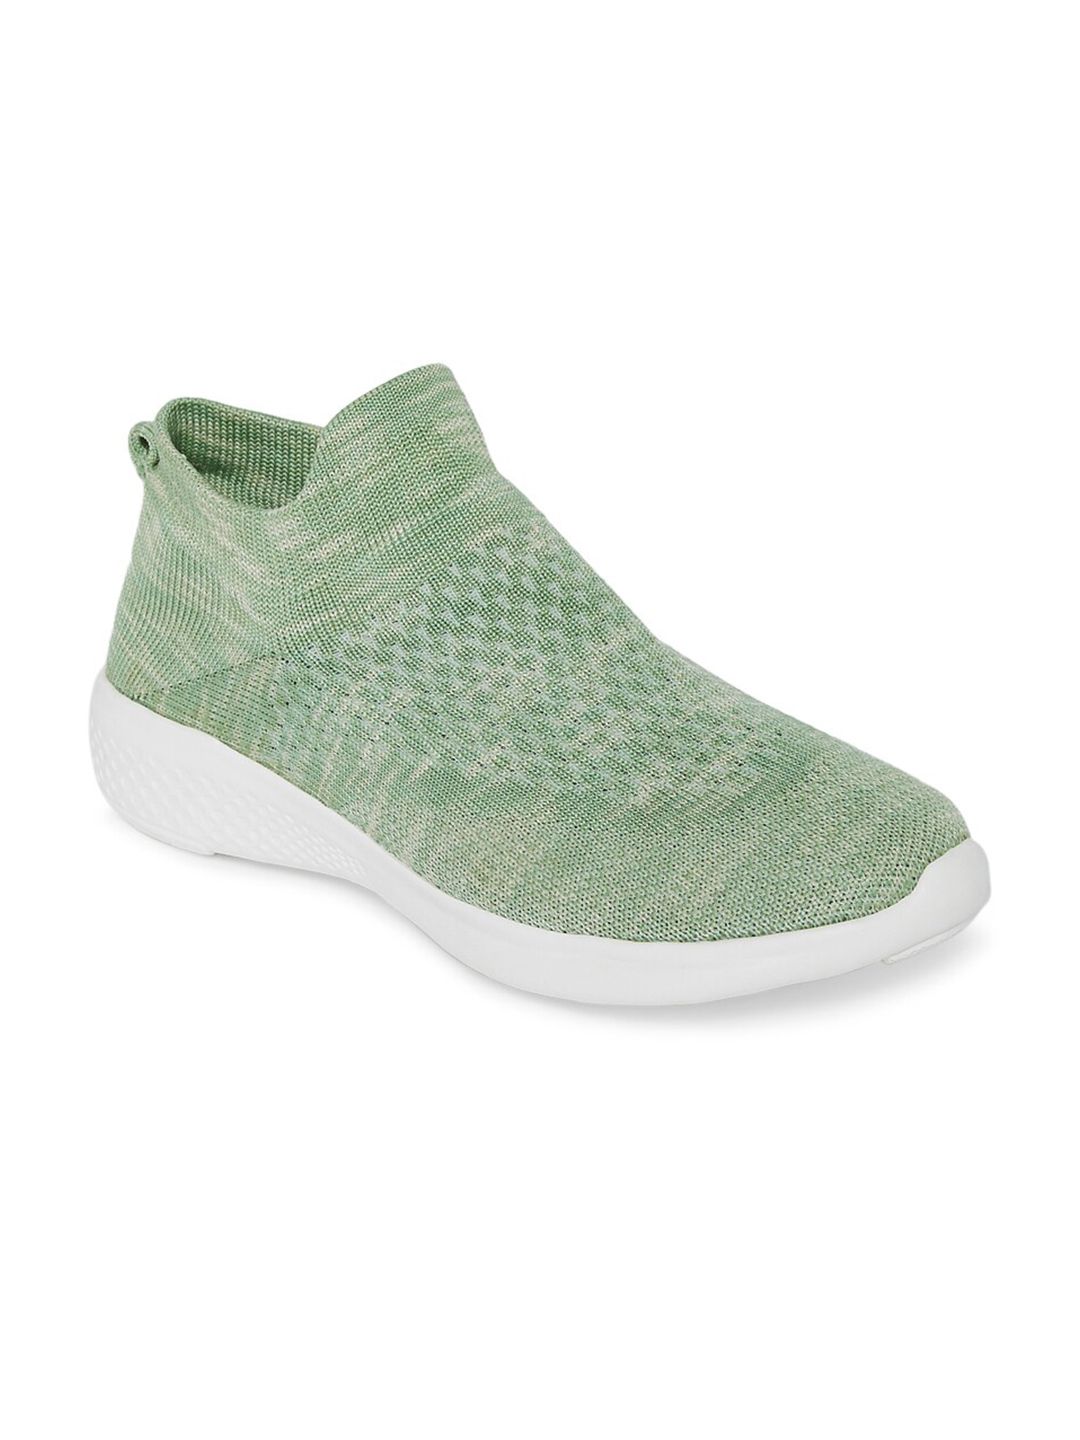 People Women Green Textile Walking Non-Marking Shoes Price in India